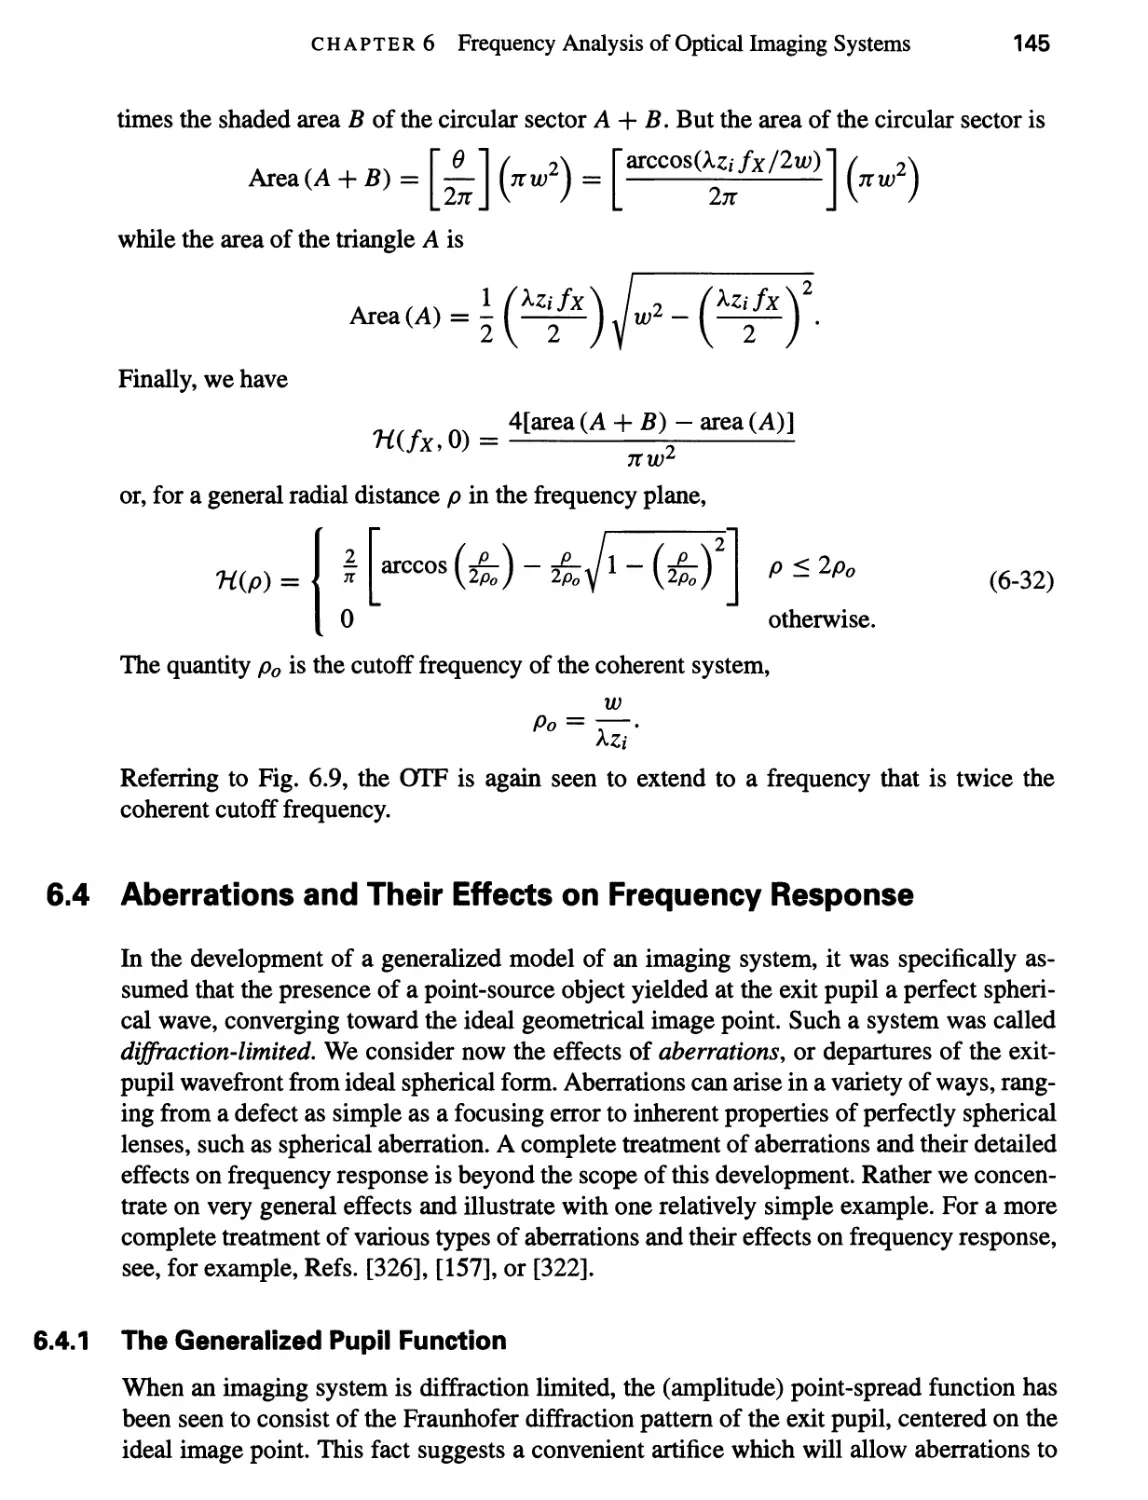 6.4 Aberrations and Their Effects on Frequency Response 145